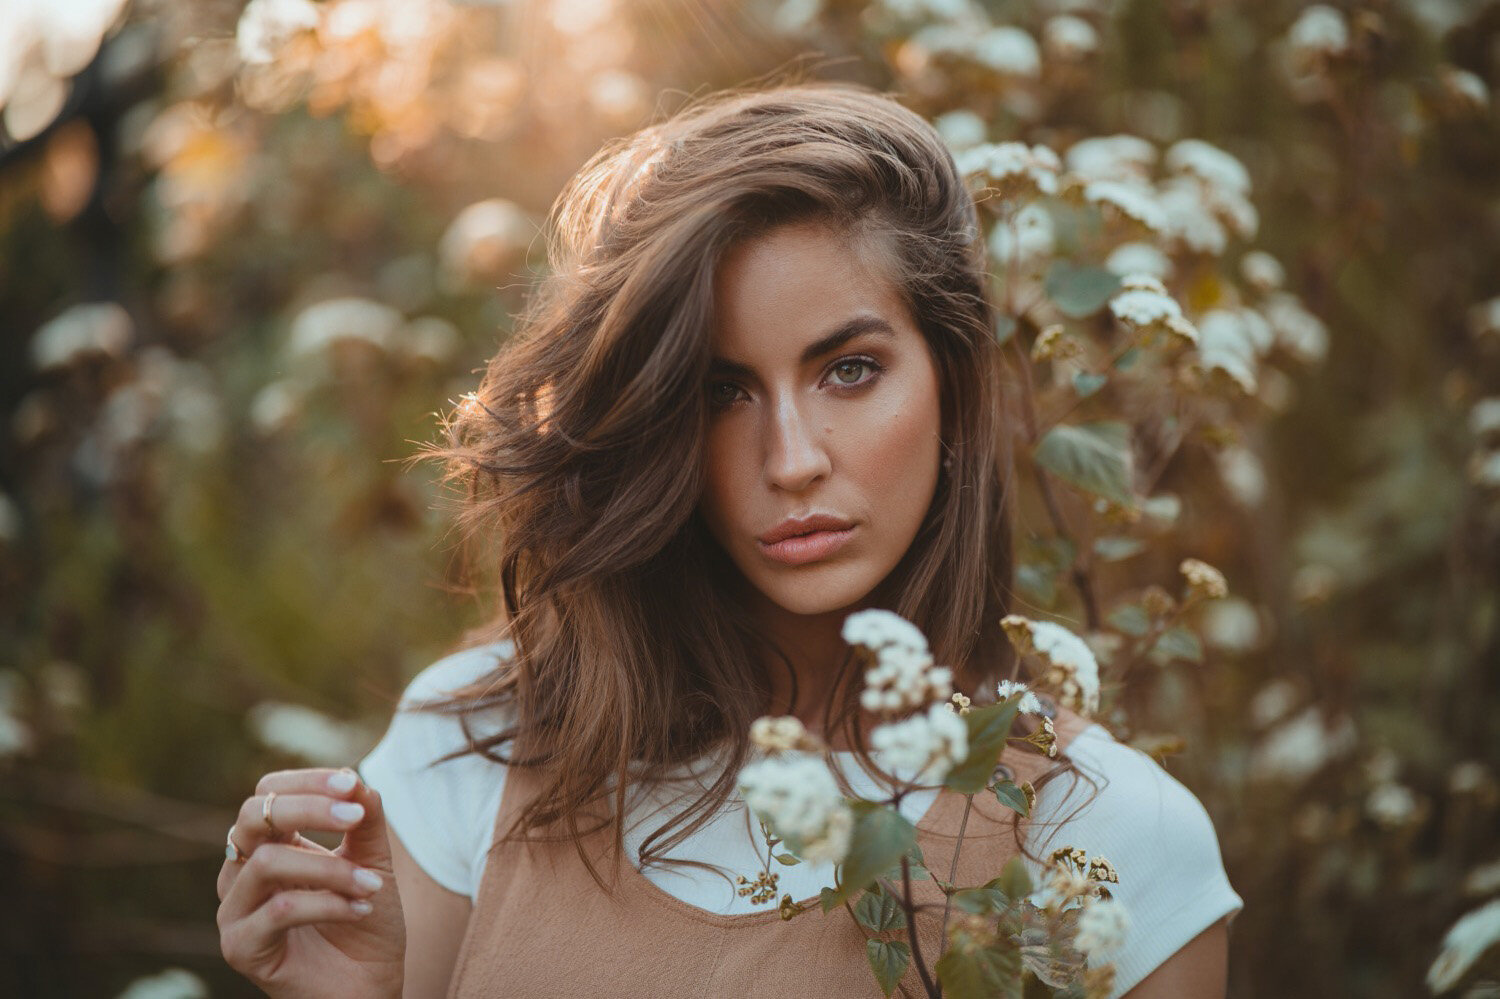 Samyang AF 85mm f1.4 FE Portrait Photography A7III JULIA TROTTI | Photography Tutorials + Camera and Lens Reviews